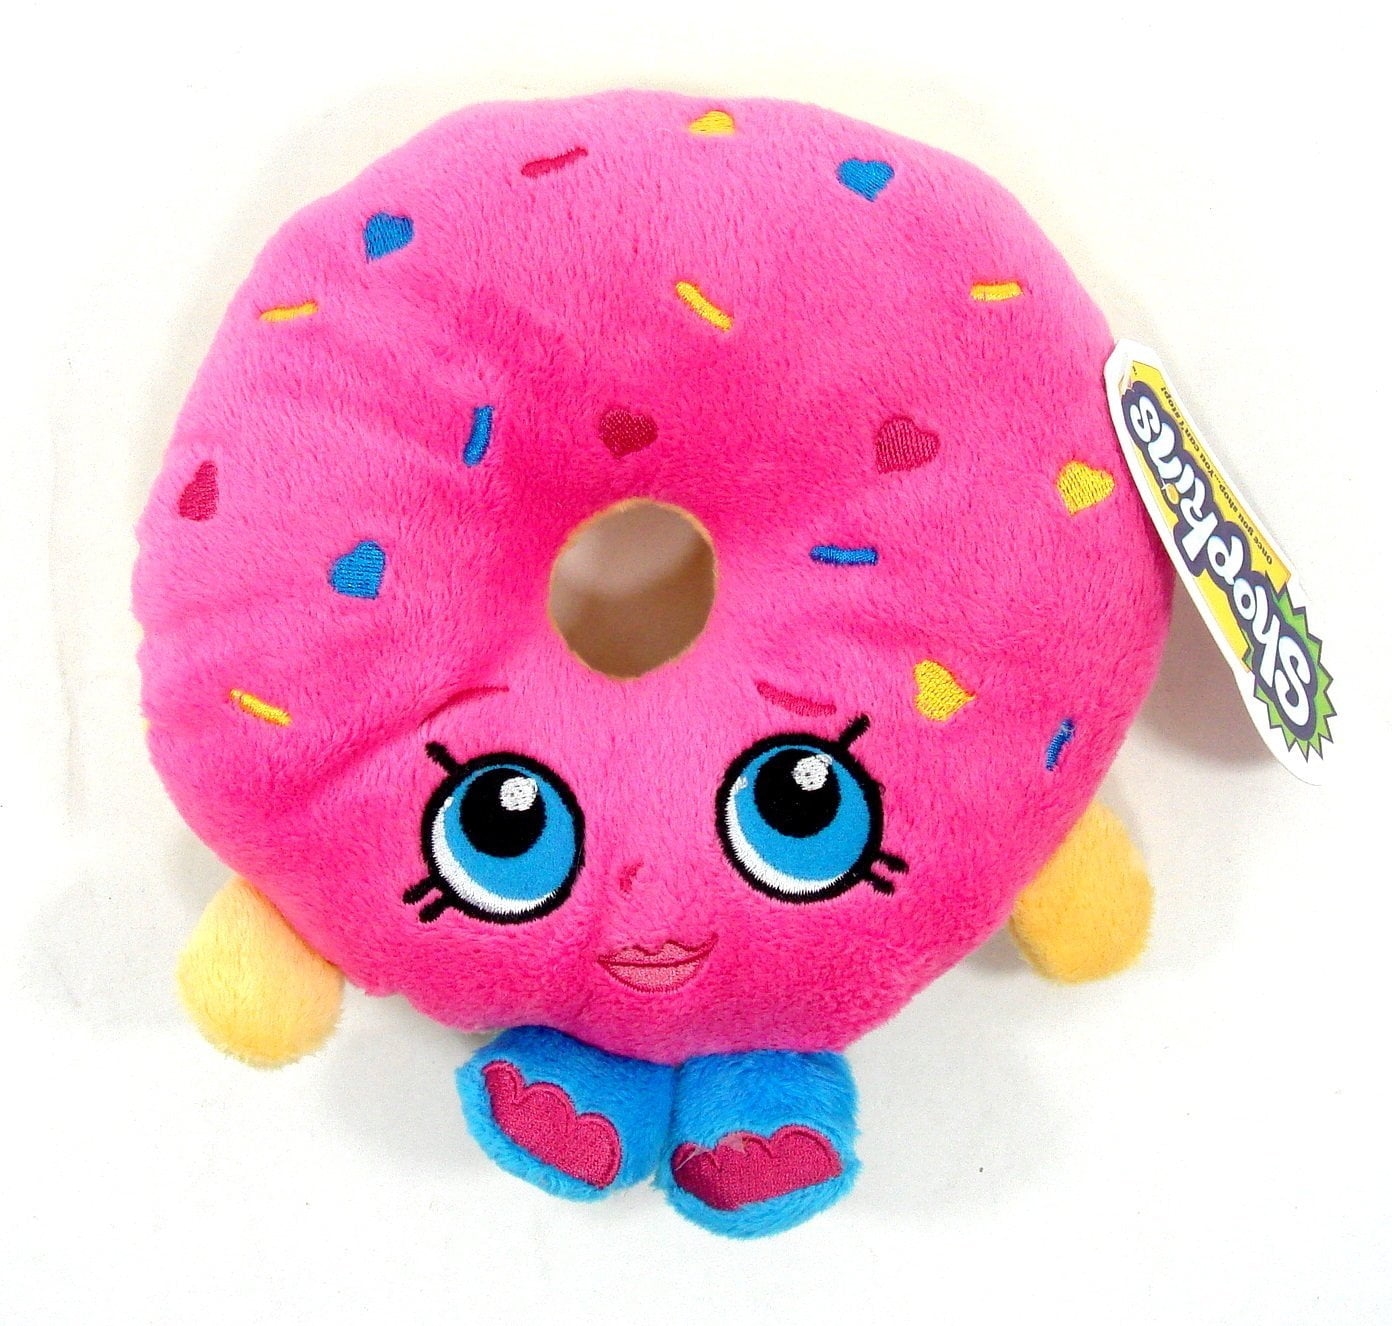 Shopkins Plush Toy Sceret Sally Diary 7 Inch New USA Seller Moose Fast Ship+ 